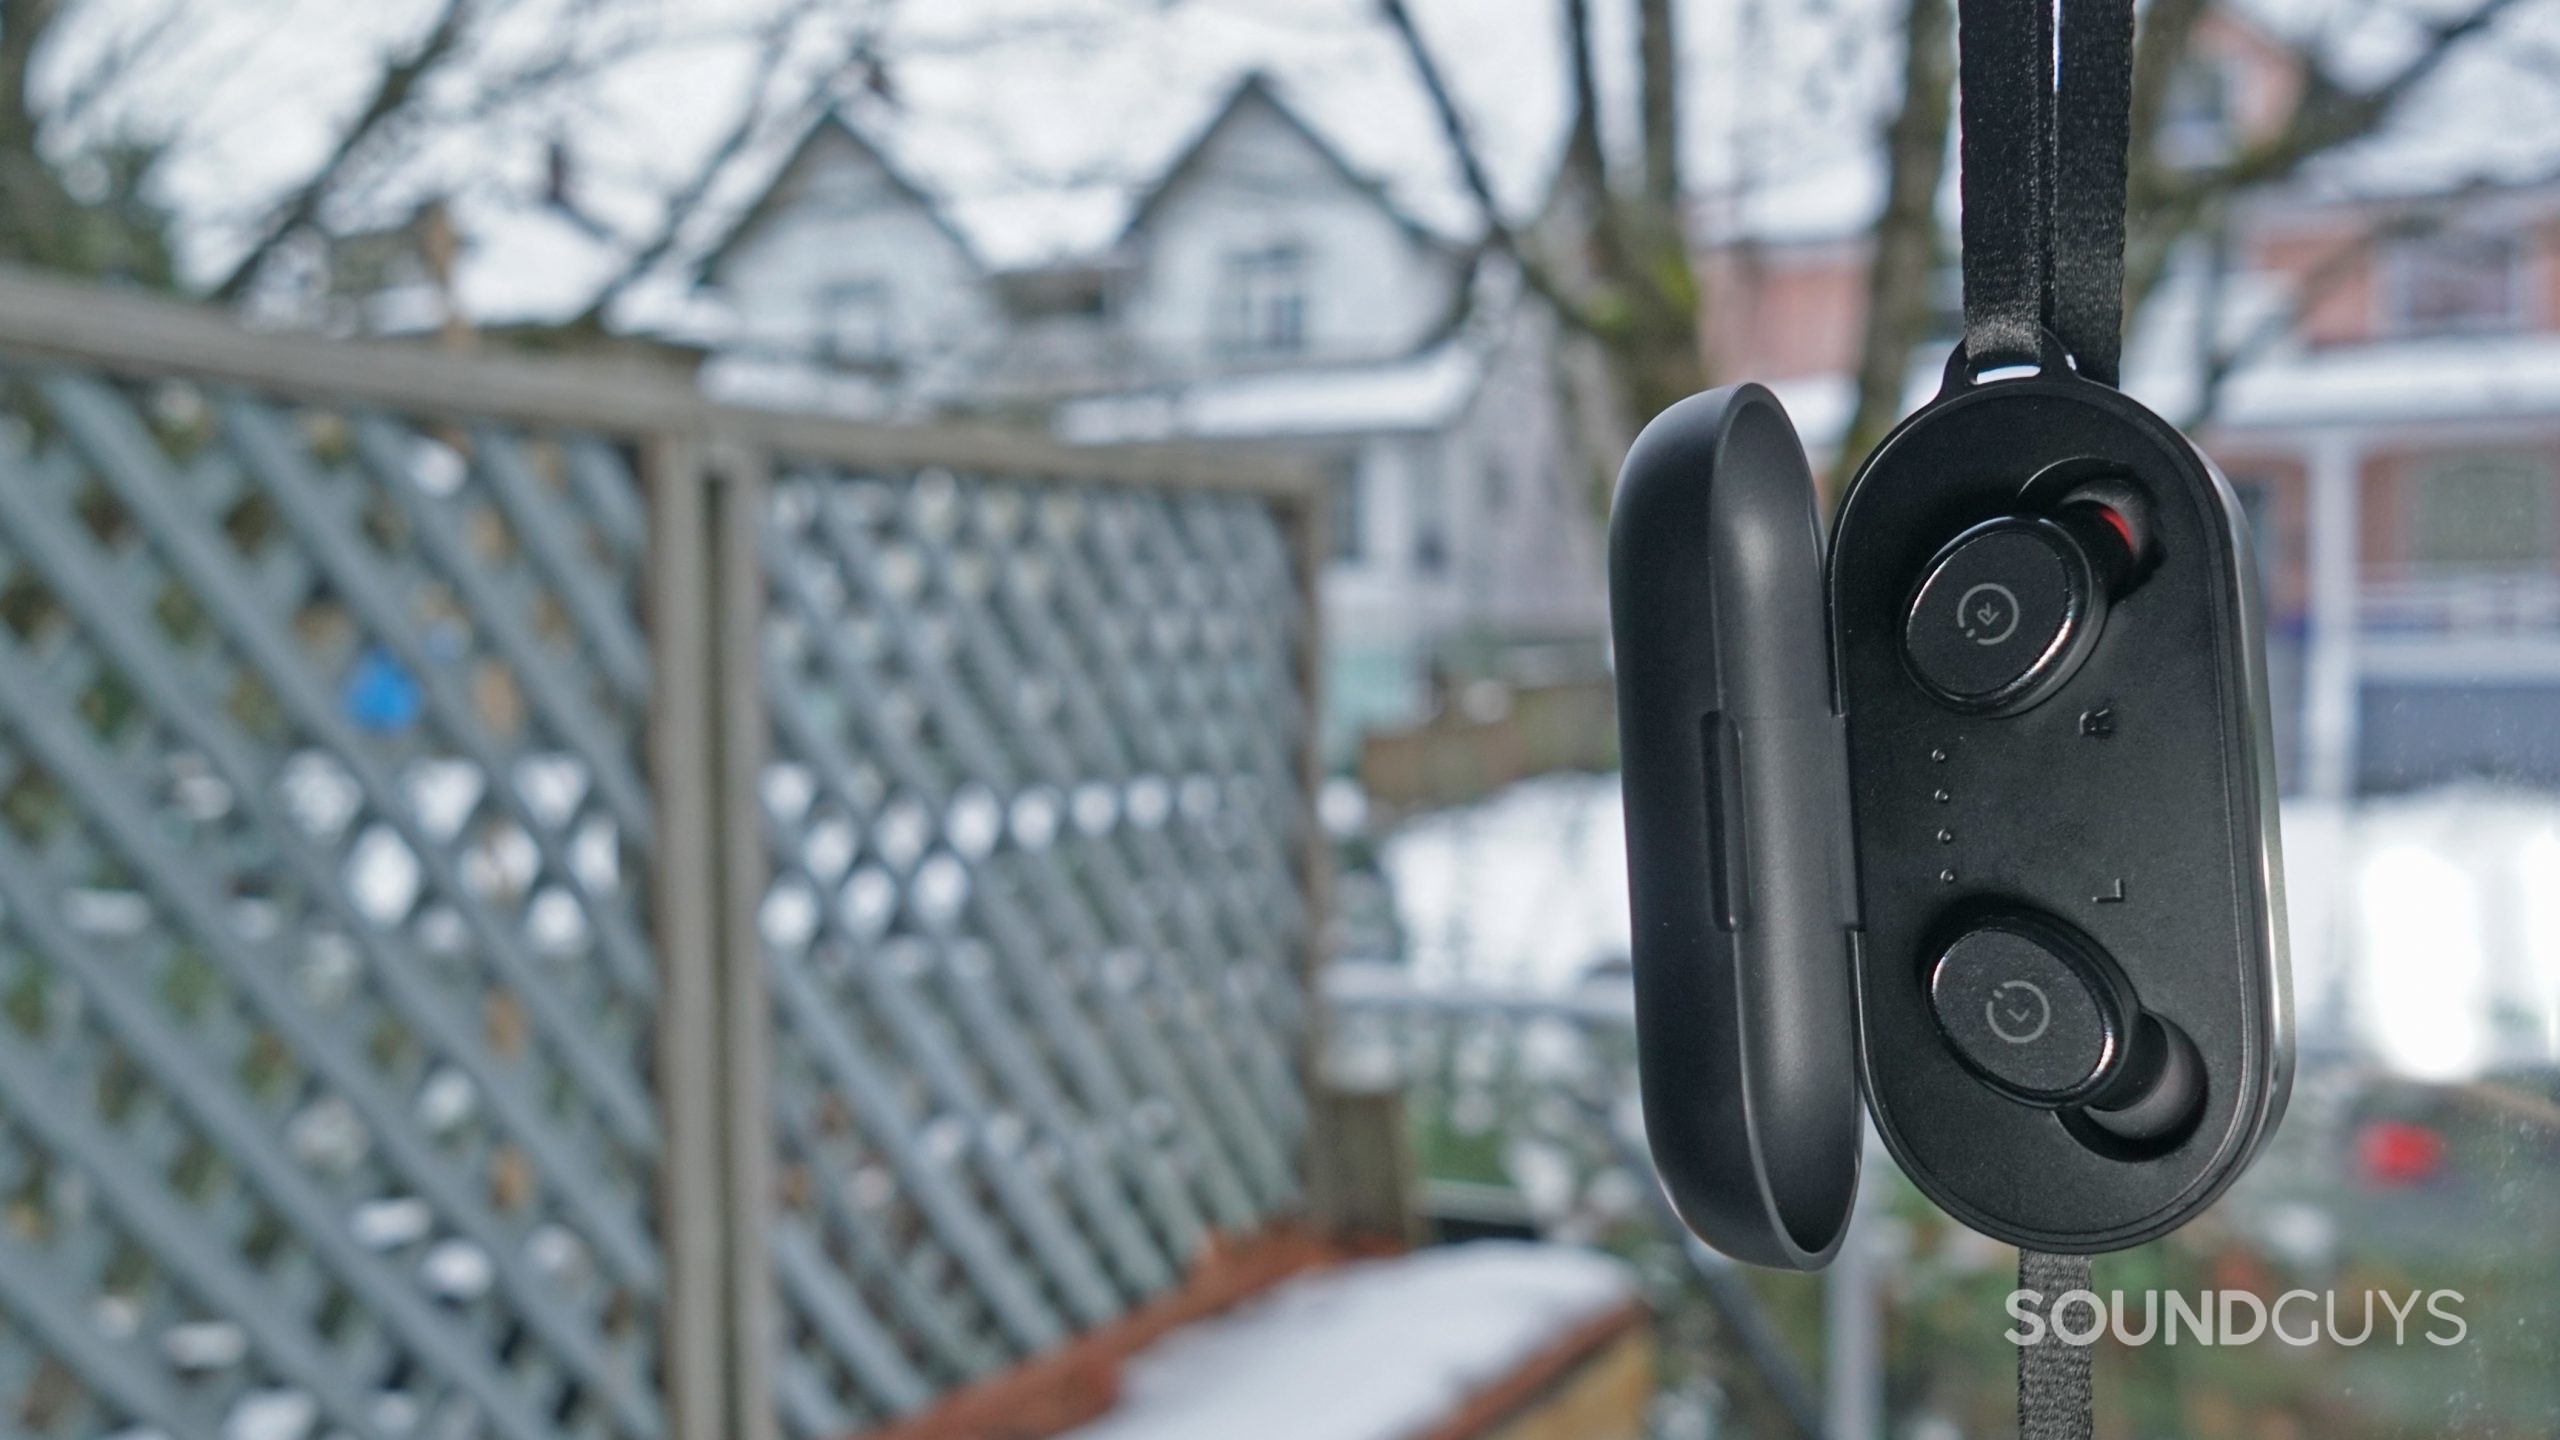 The TOZO T10 charing case hangs from its strap with the earbuds inside.